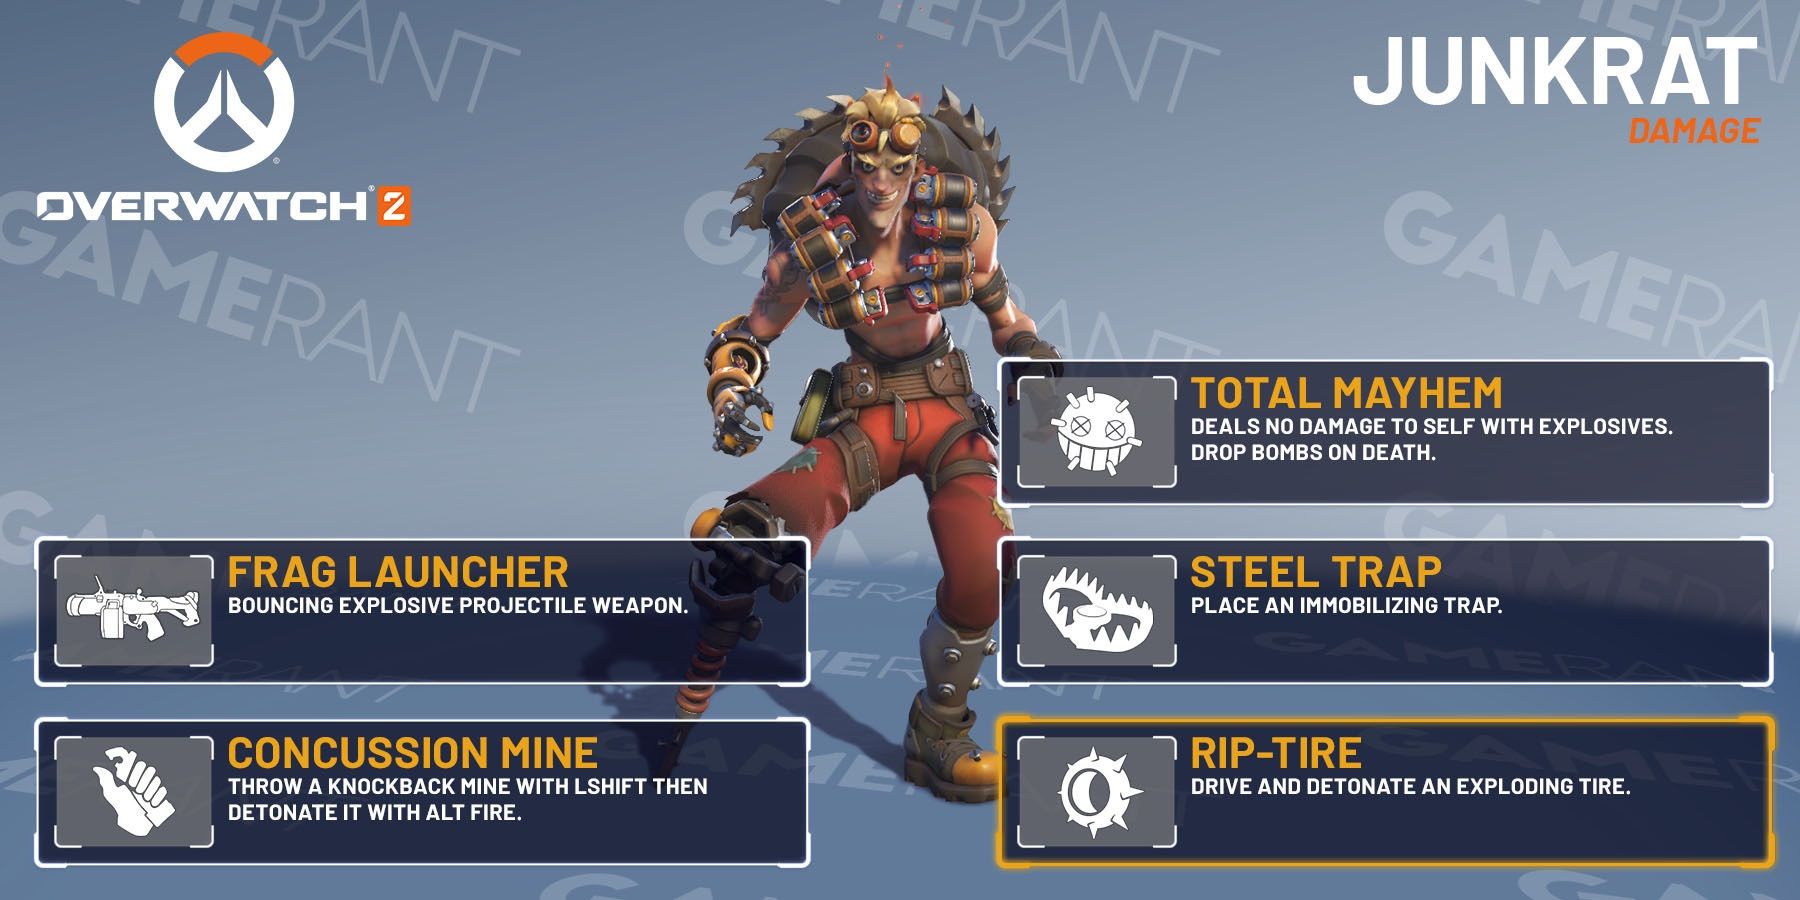 OVERWATCH 2 JUNKRAT GUIDE LORE ABILITIES AND GAMEPLAY